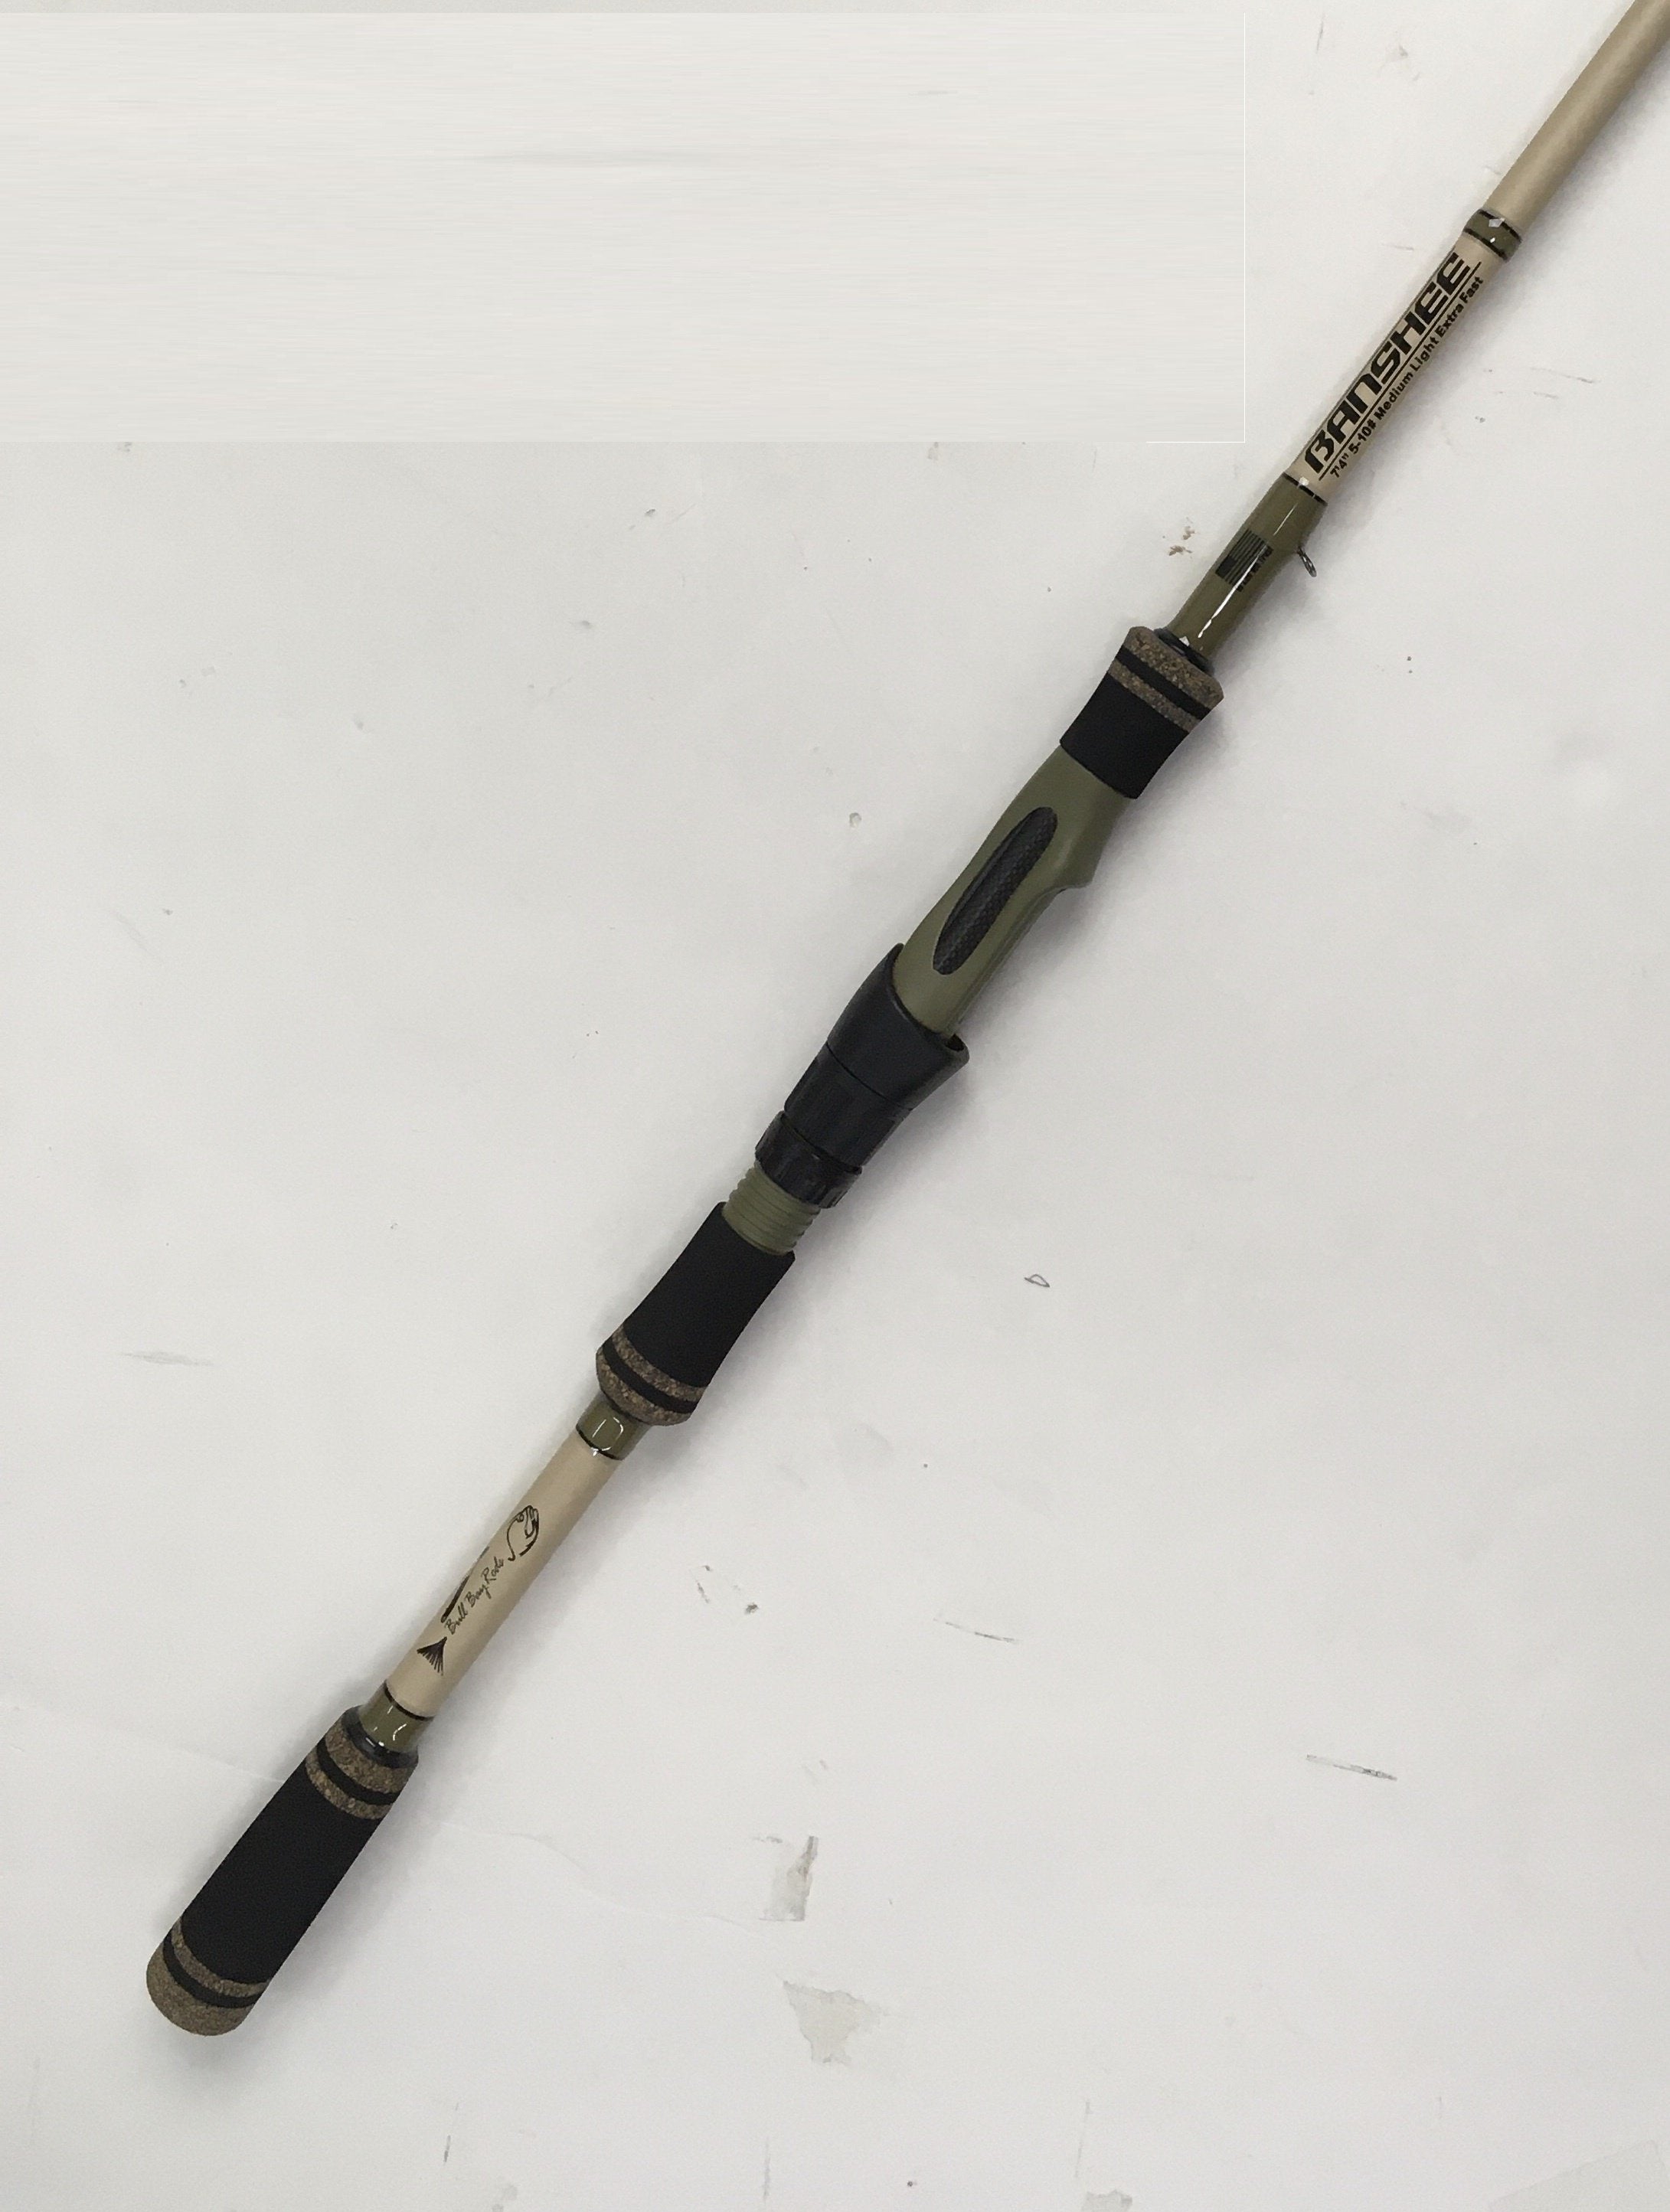 13 Fishing Fate Green - 7'6 M Inshore Casting Rod - Andy Thornal Company